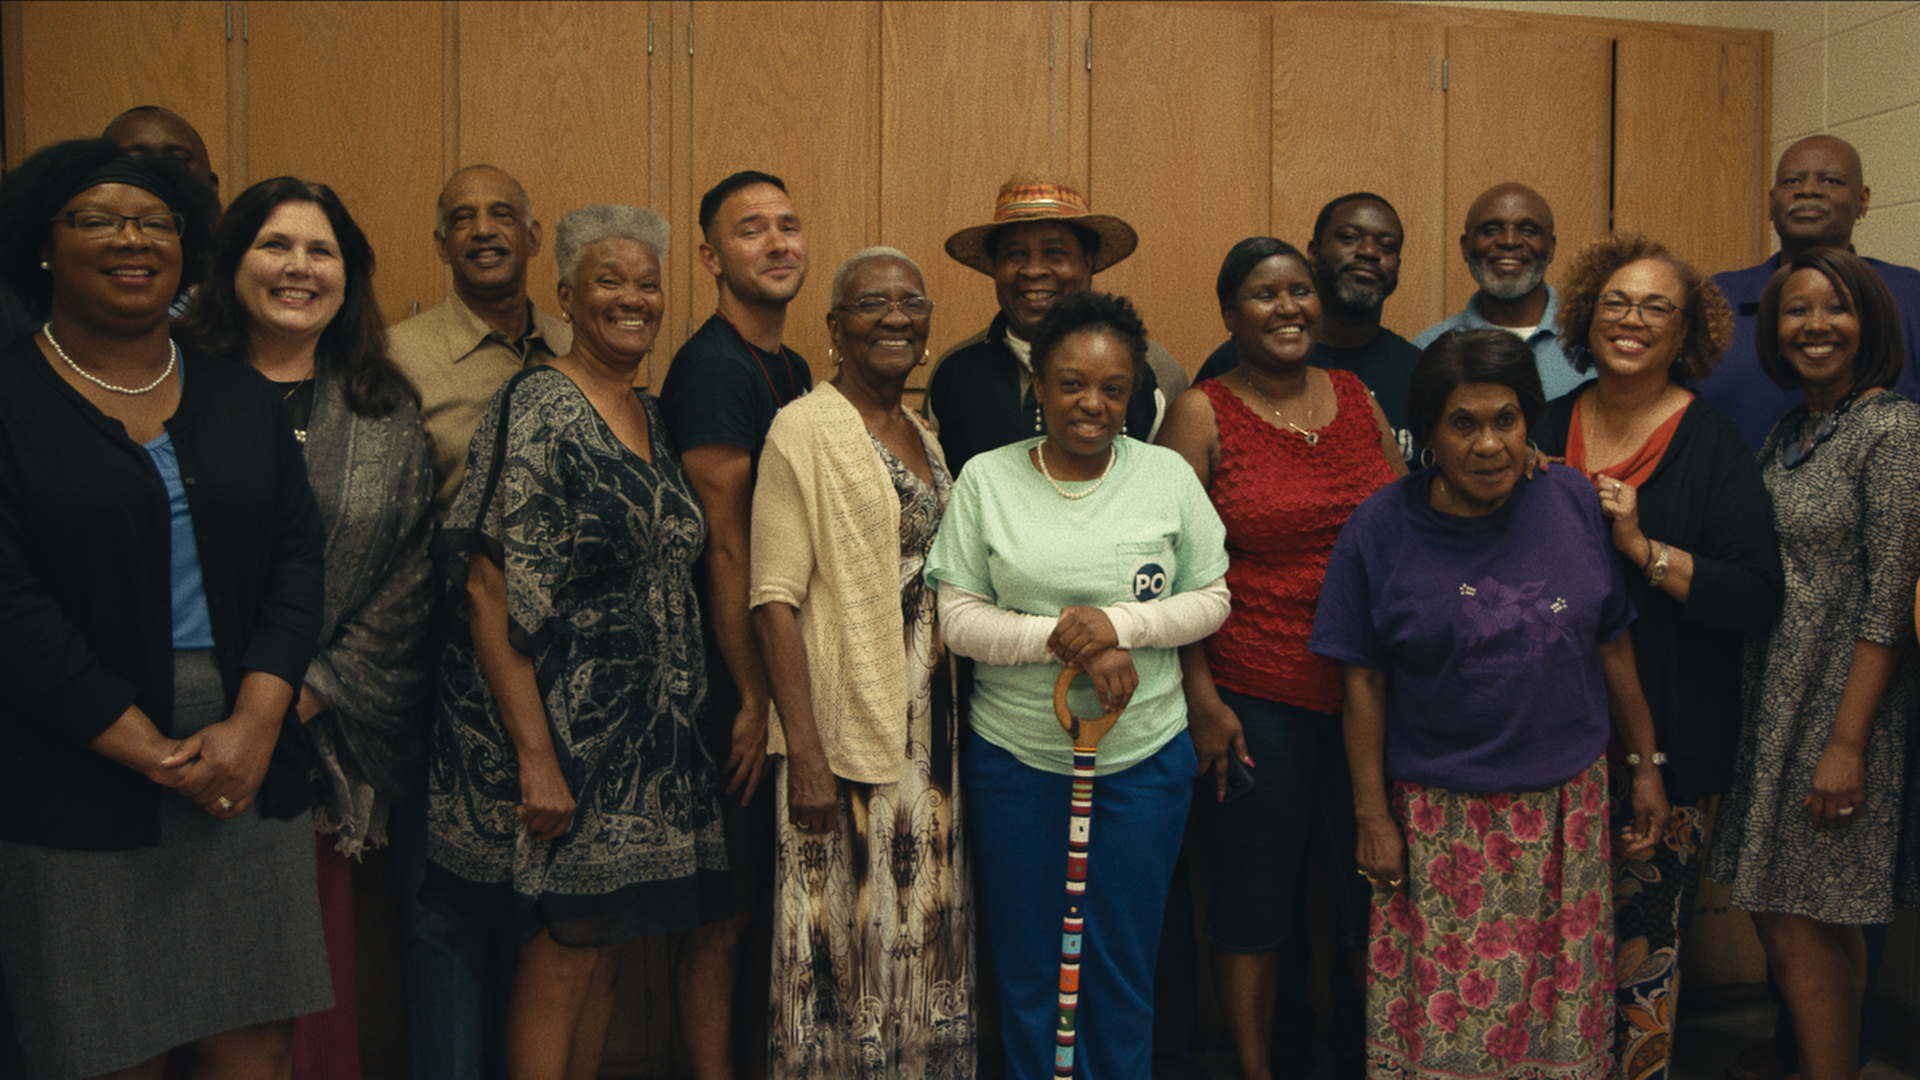 Clotilda descendants and community activists pose for a group photo in documentary Descendant.